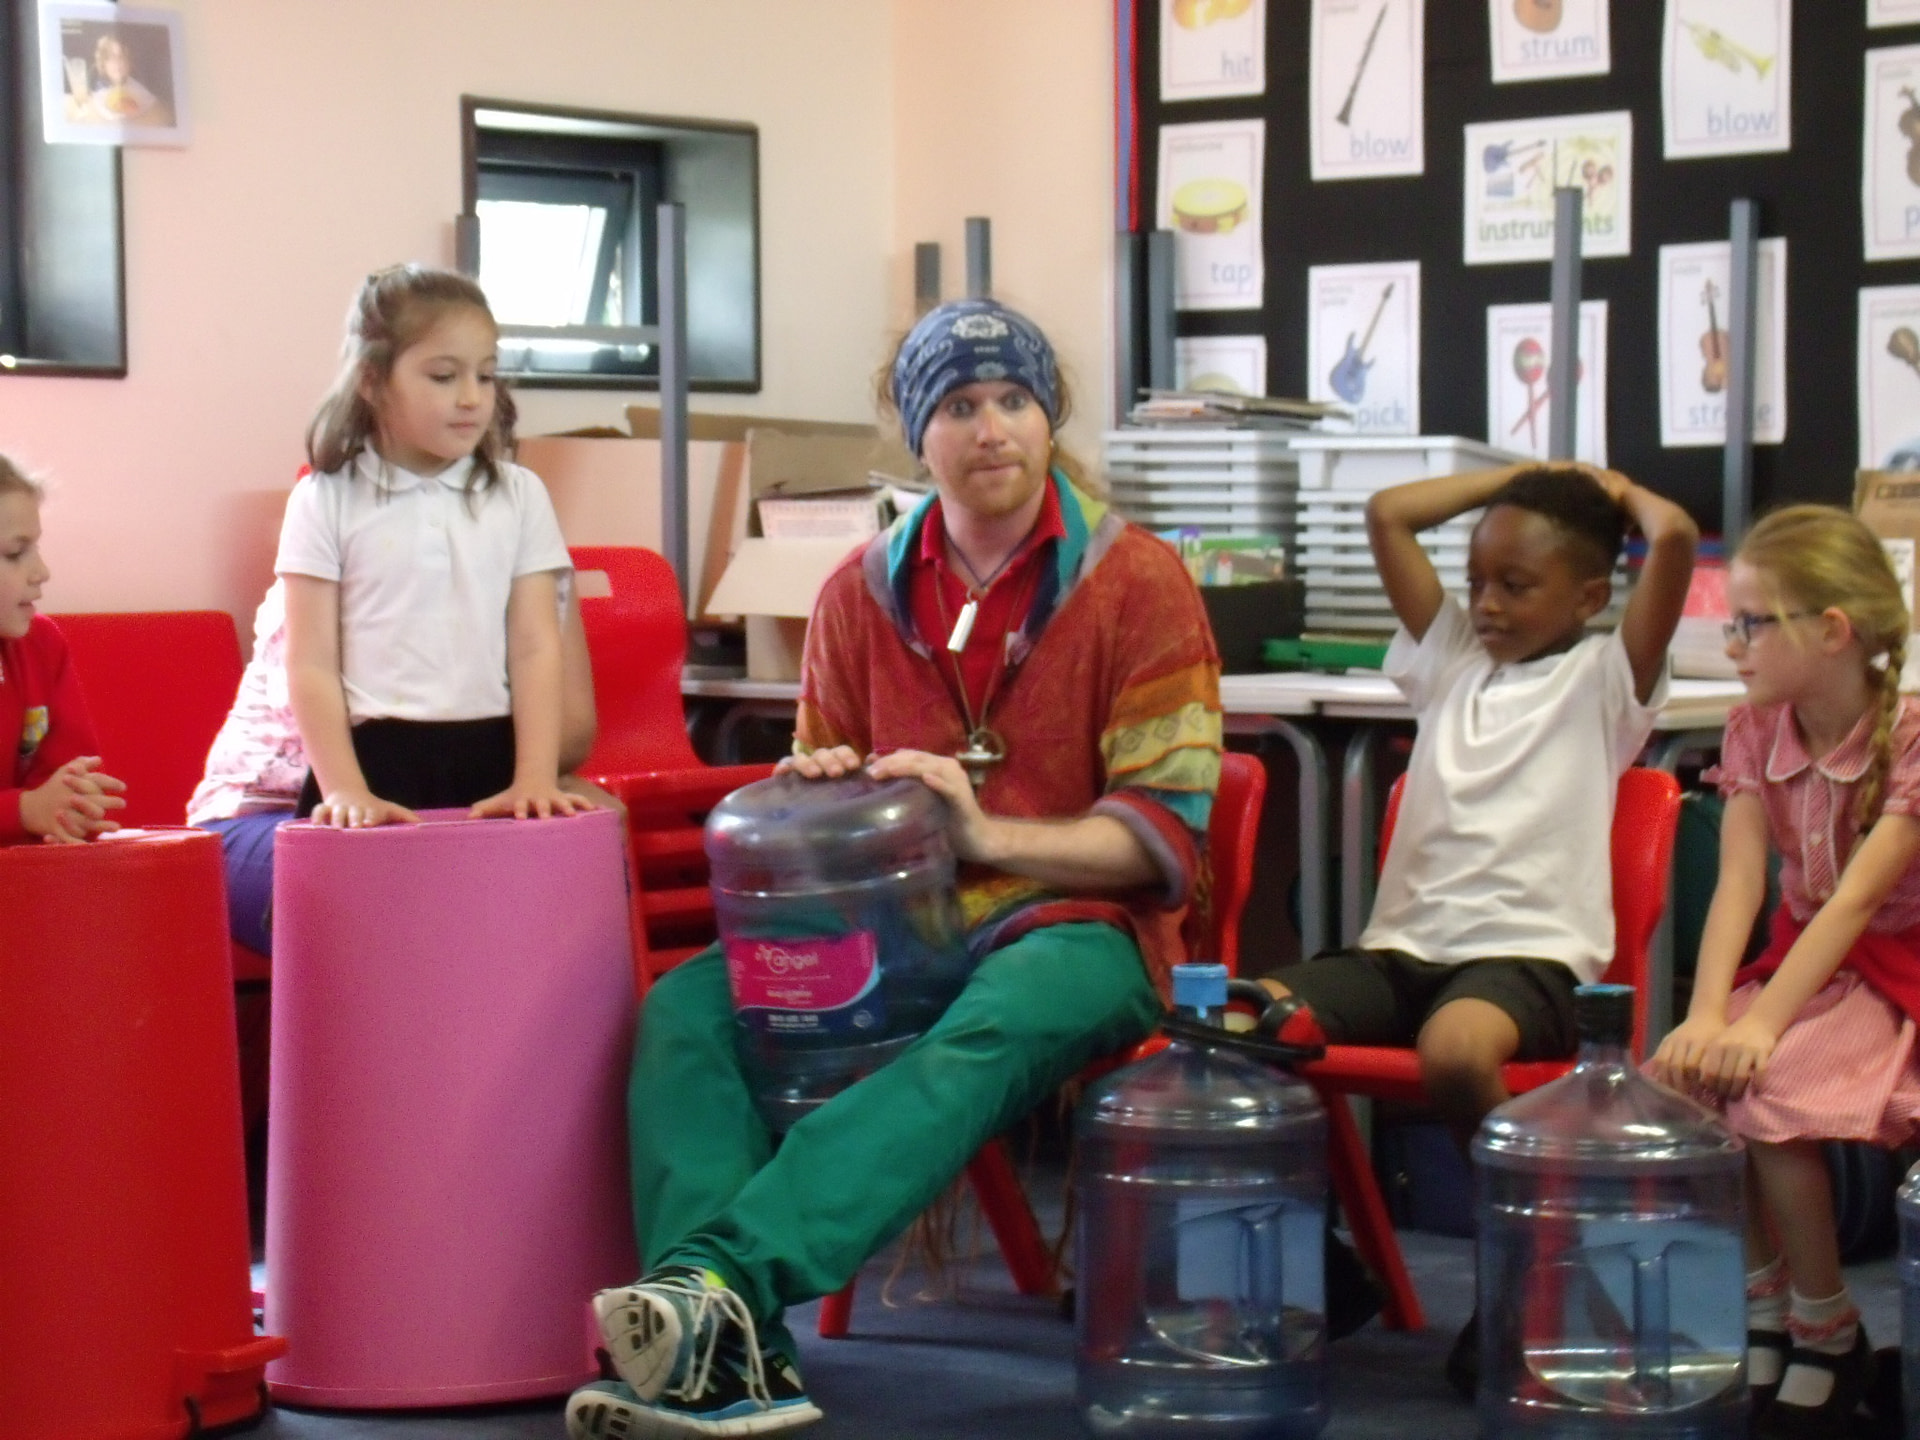 School children and teacher playing music on large colourful empty bins and bottles